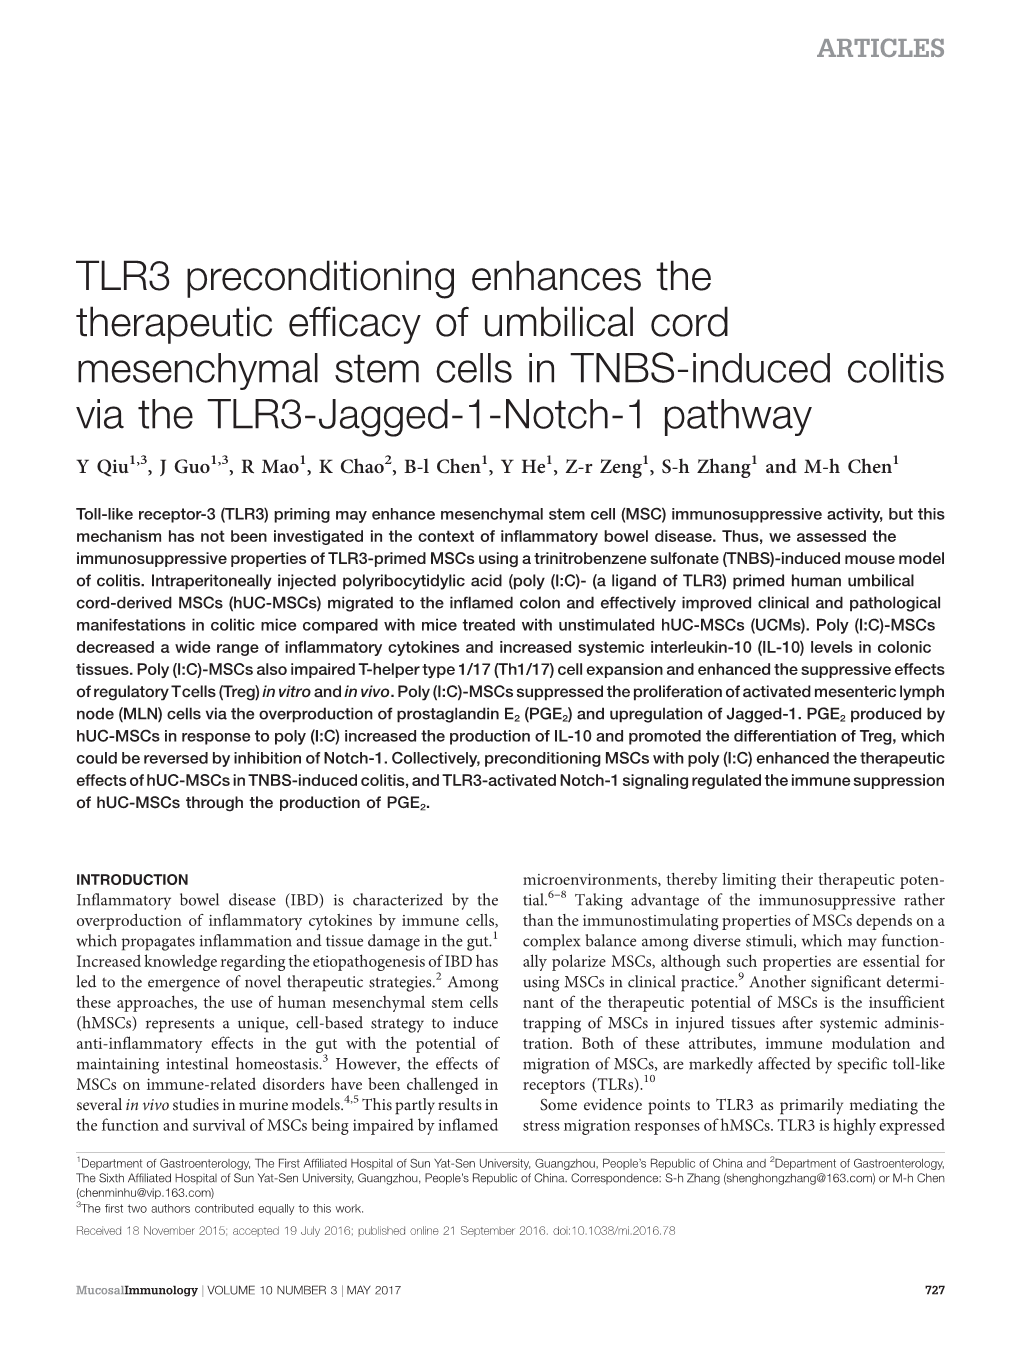 TLR3 Preconditioning Enhances the Therapeutic Efficacy of Umbilical Cord Mesenchymal Stem Cells in TNBS-Induced Colitis Via the TLR3-Jagged-1-Notch-1 Pathway